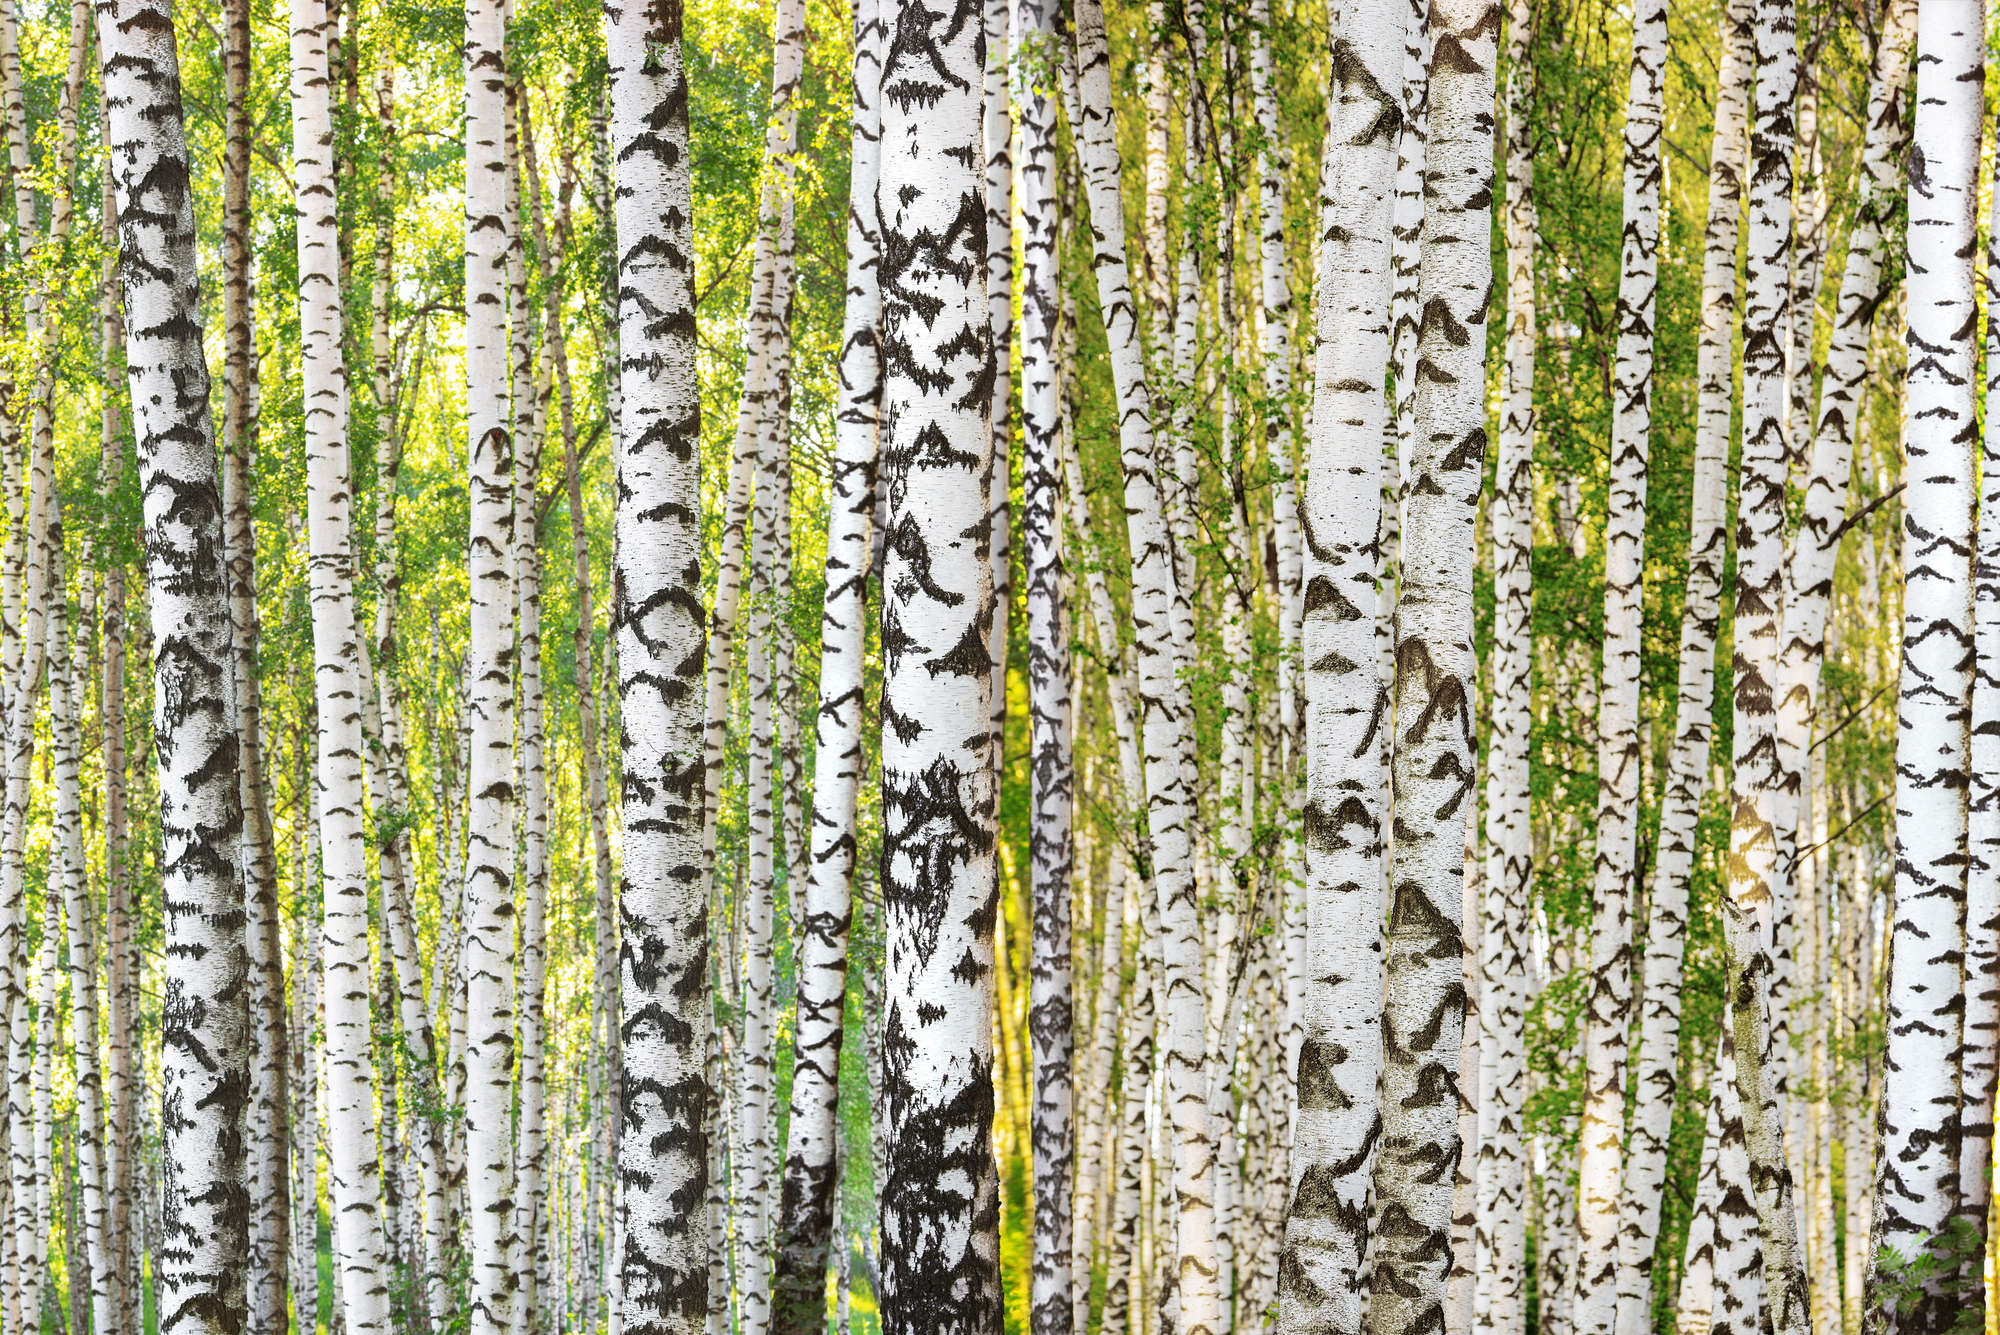             Birch forest mural tree trunk motif on textured non-woven fabric
        